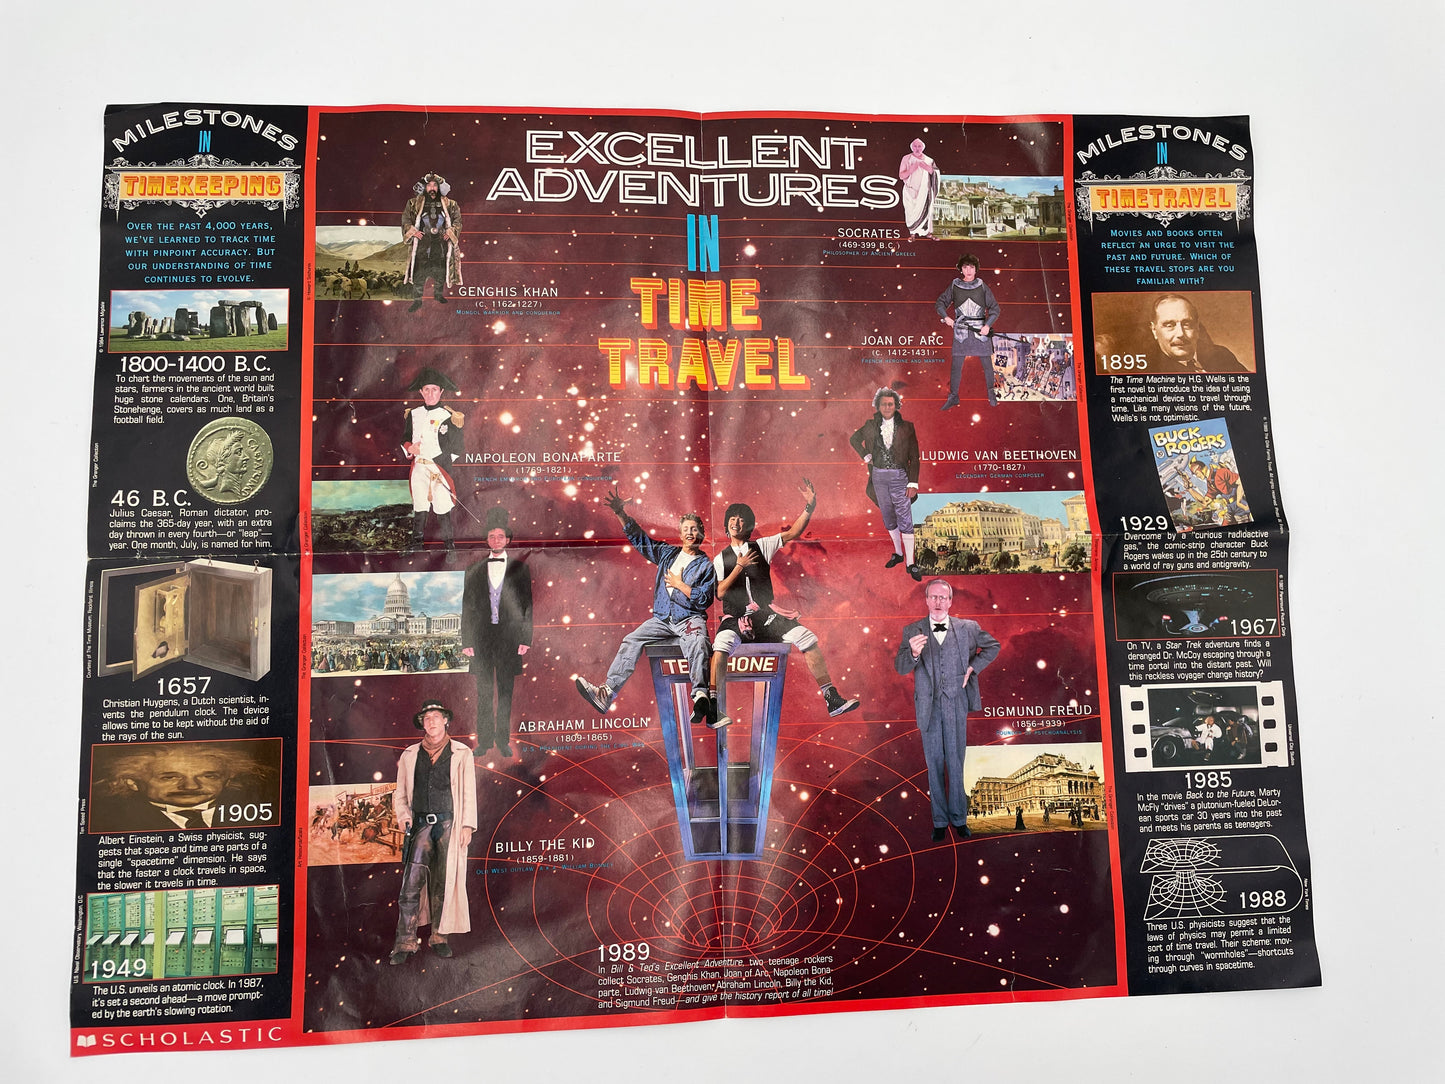 Bill & Ted’s Excellent Adventure Poster 1984 - #101990